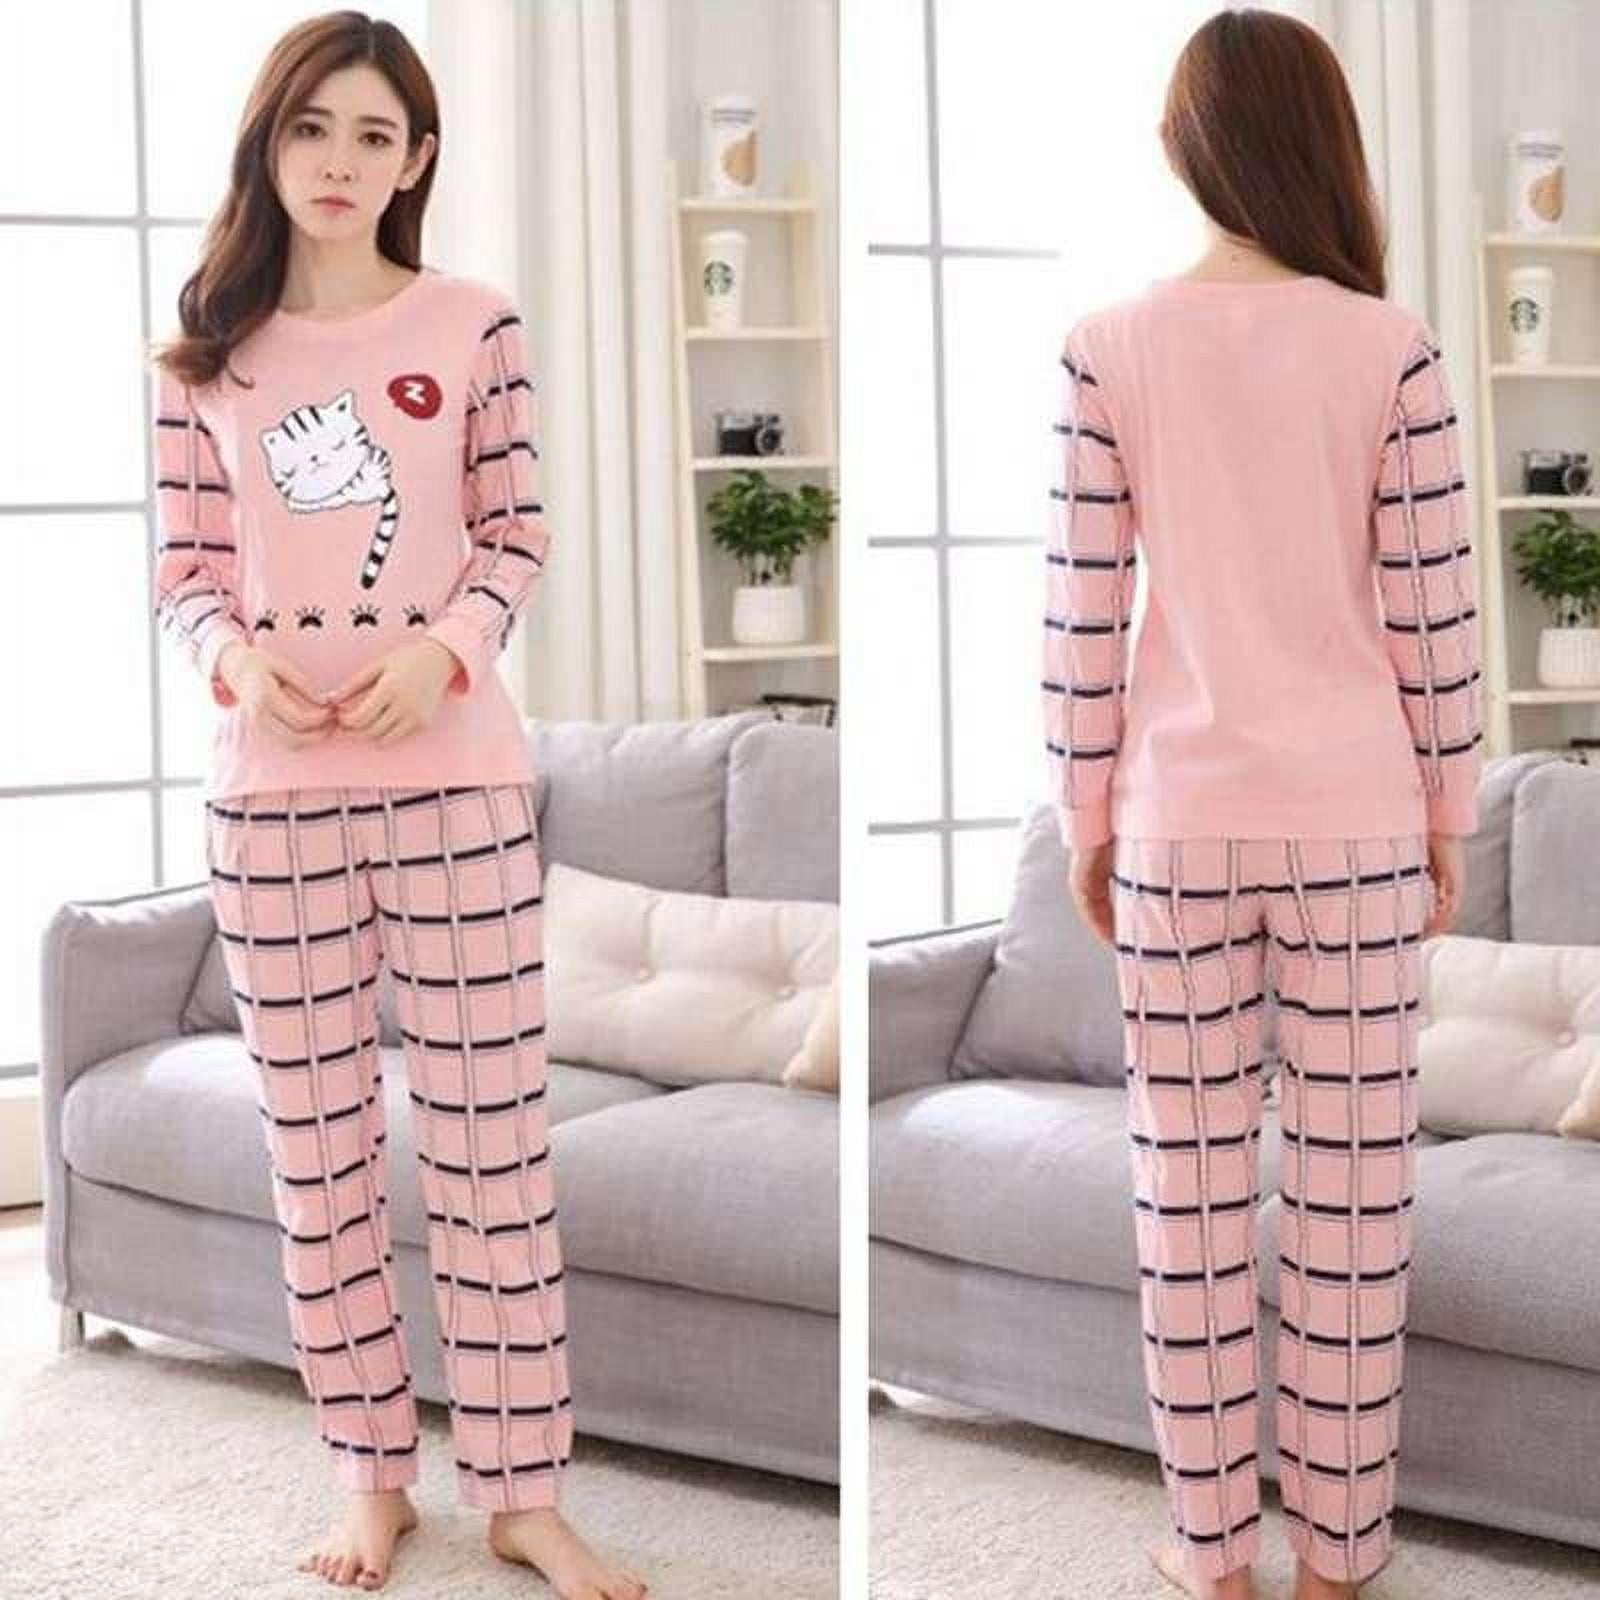 Buy CUTE AND YOUNG Women's Cotton Printed Night Suit Set, Top and Pyjama  for Women, Soft & Comfortable, Casual Sleepwear Dress, Night Wear Clothes,  Pajamas with Convenient Side Pockets Grey at Amazon.in